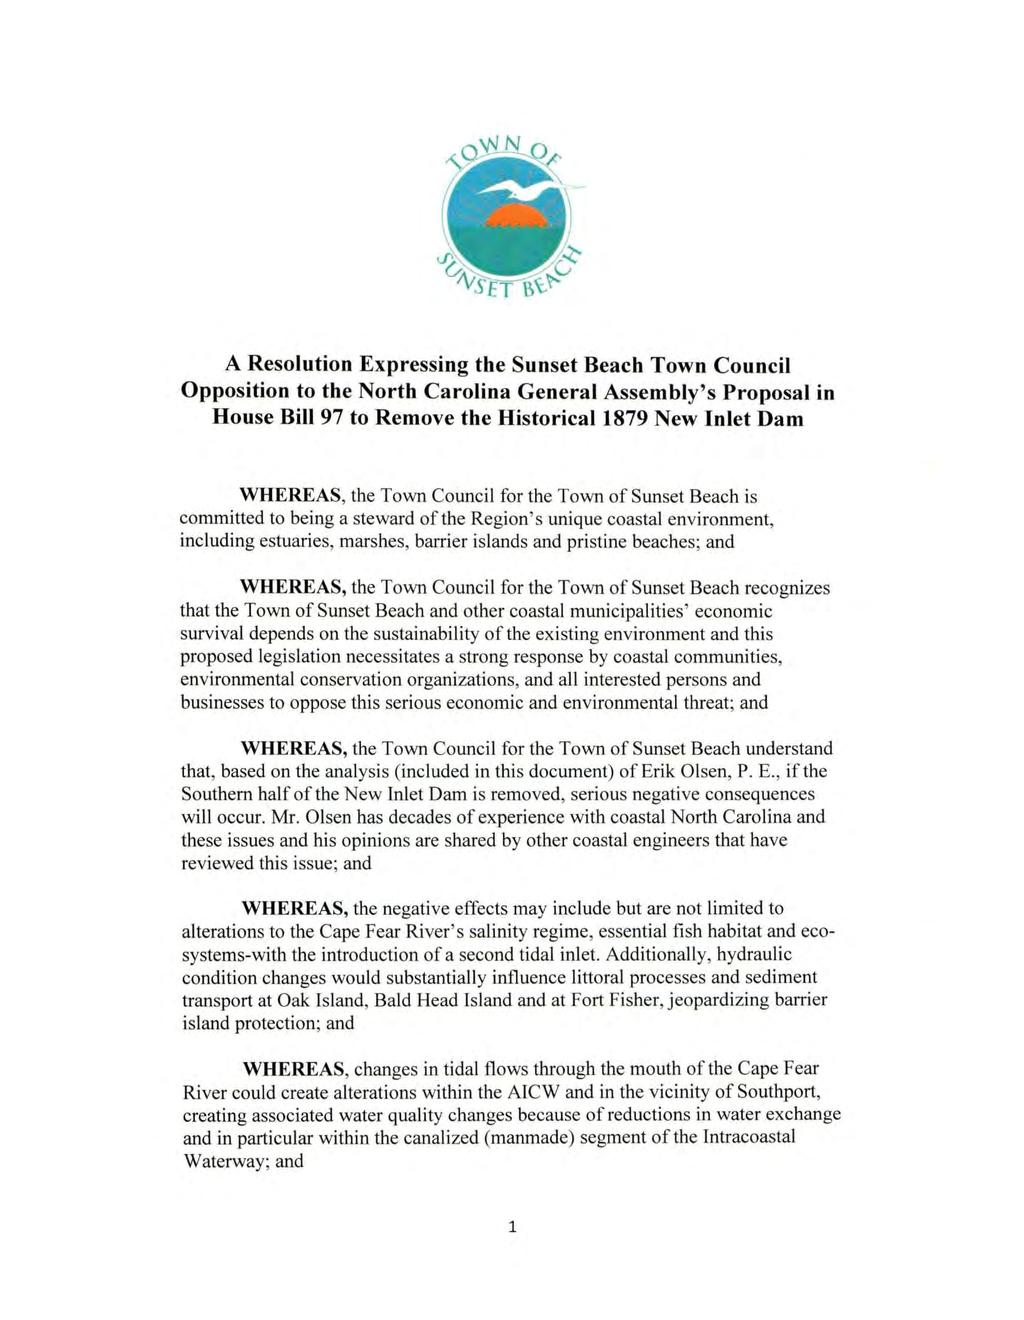 A Resolution Expressing the Sunset Beach Town Council Opposition to the North Carolina General Assembly's Proposal in House Bill 97 to Remove the Historical 1879 New Inlet Dam WHEREAS, the Town